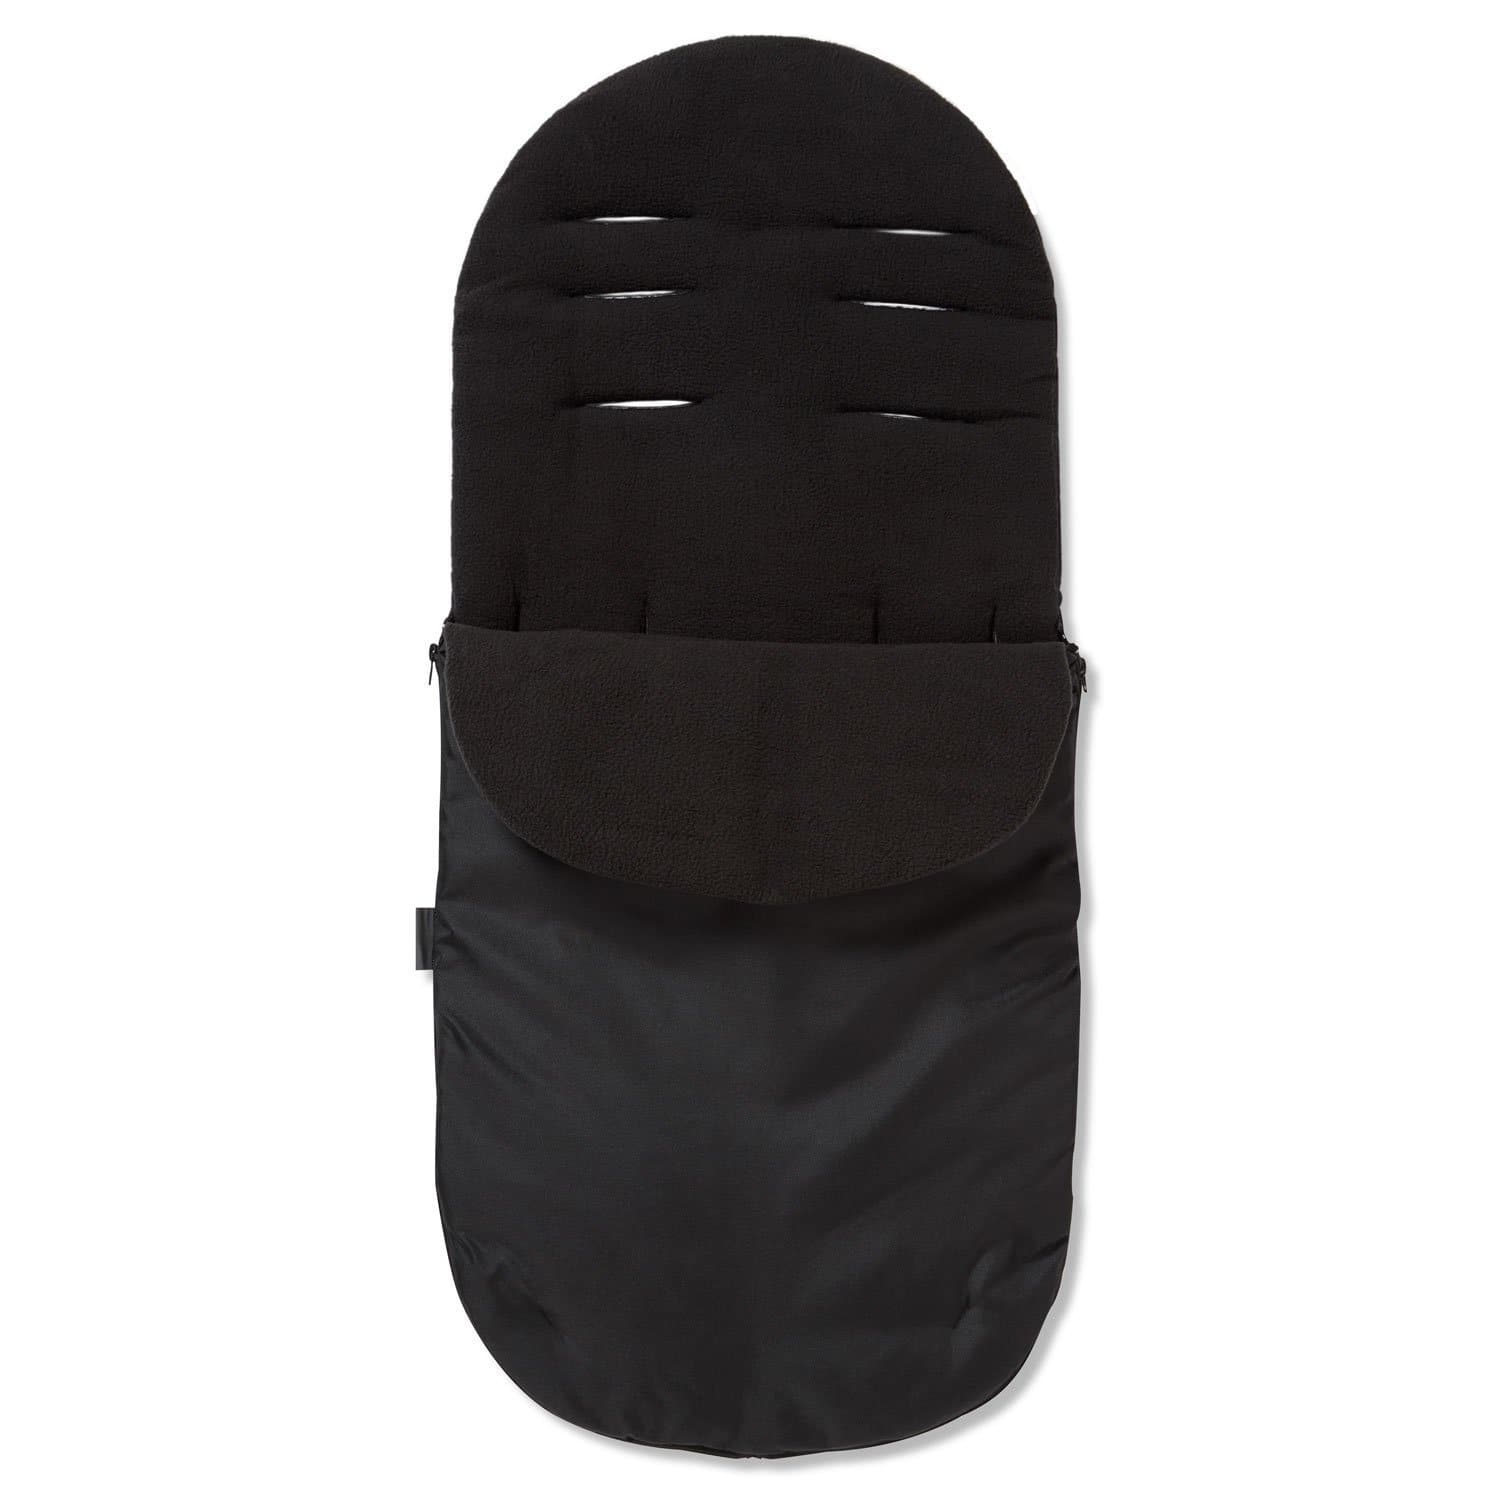 Footmuff / Cosy Toes Compatible with Stokke - For Your Little One